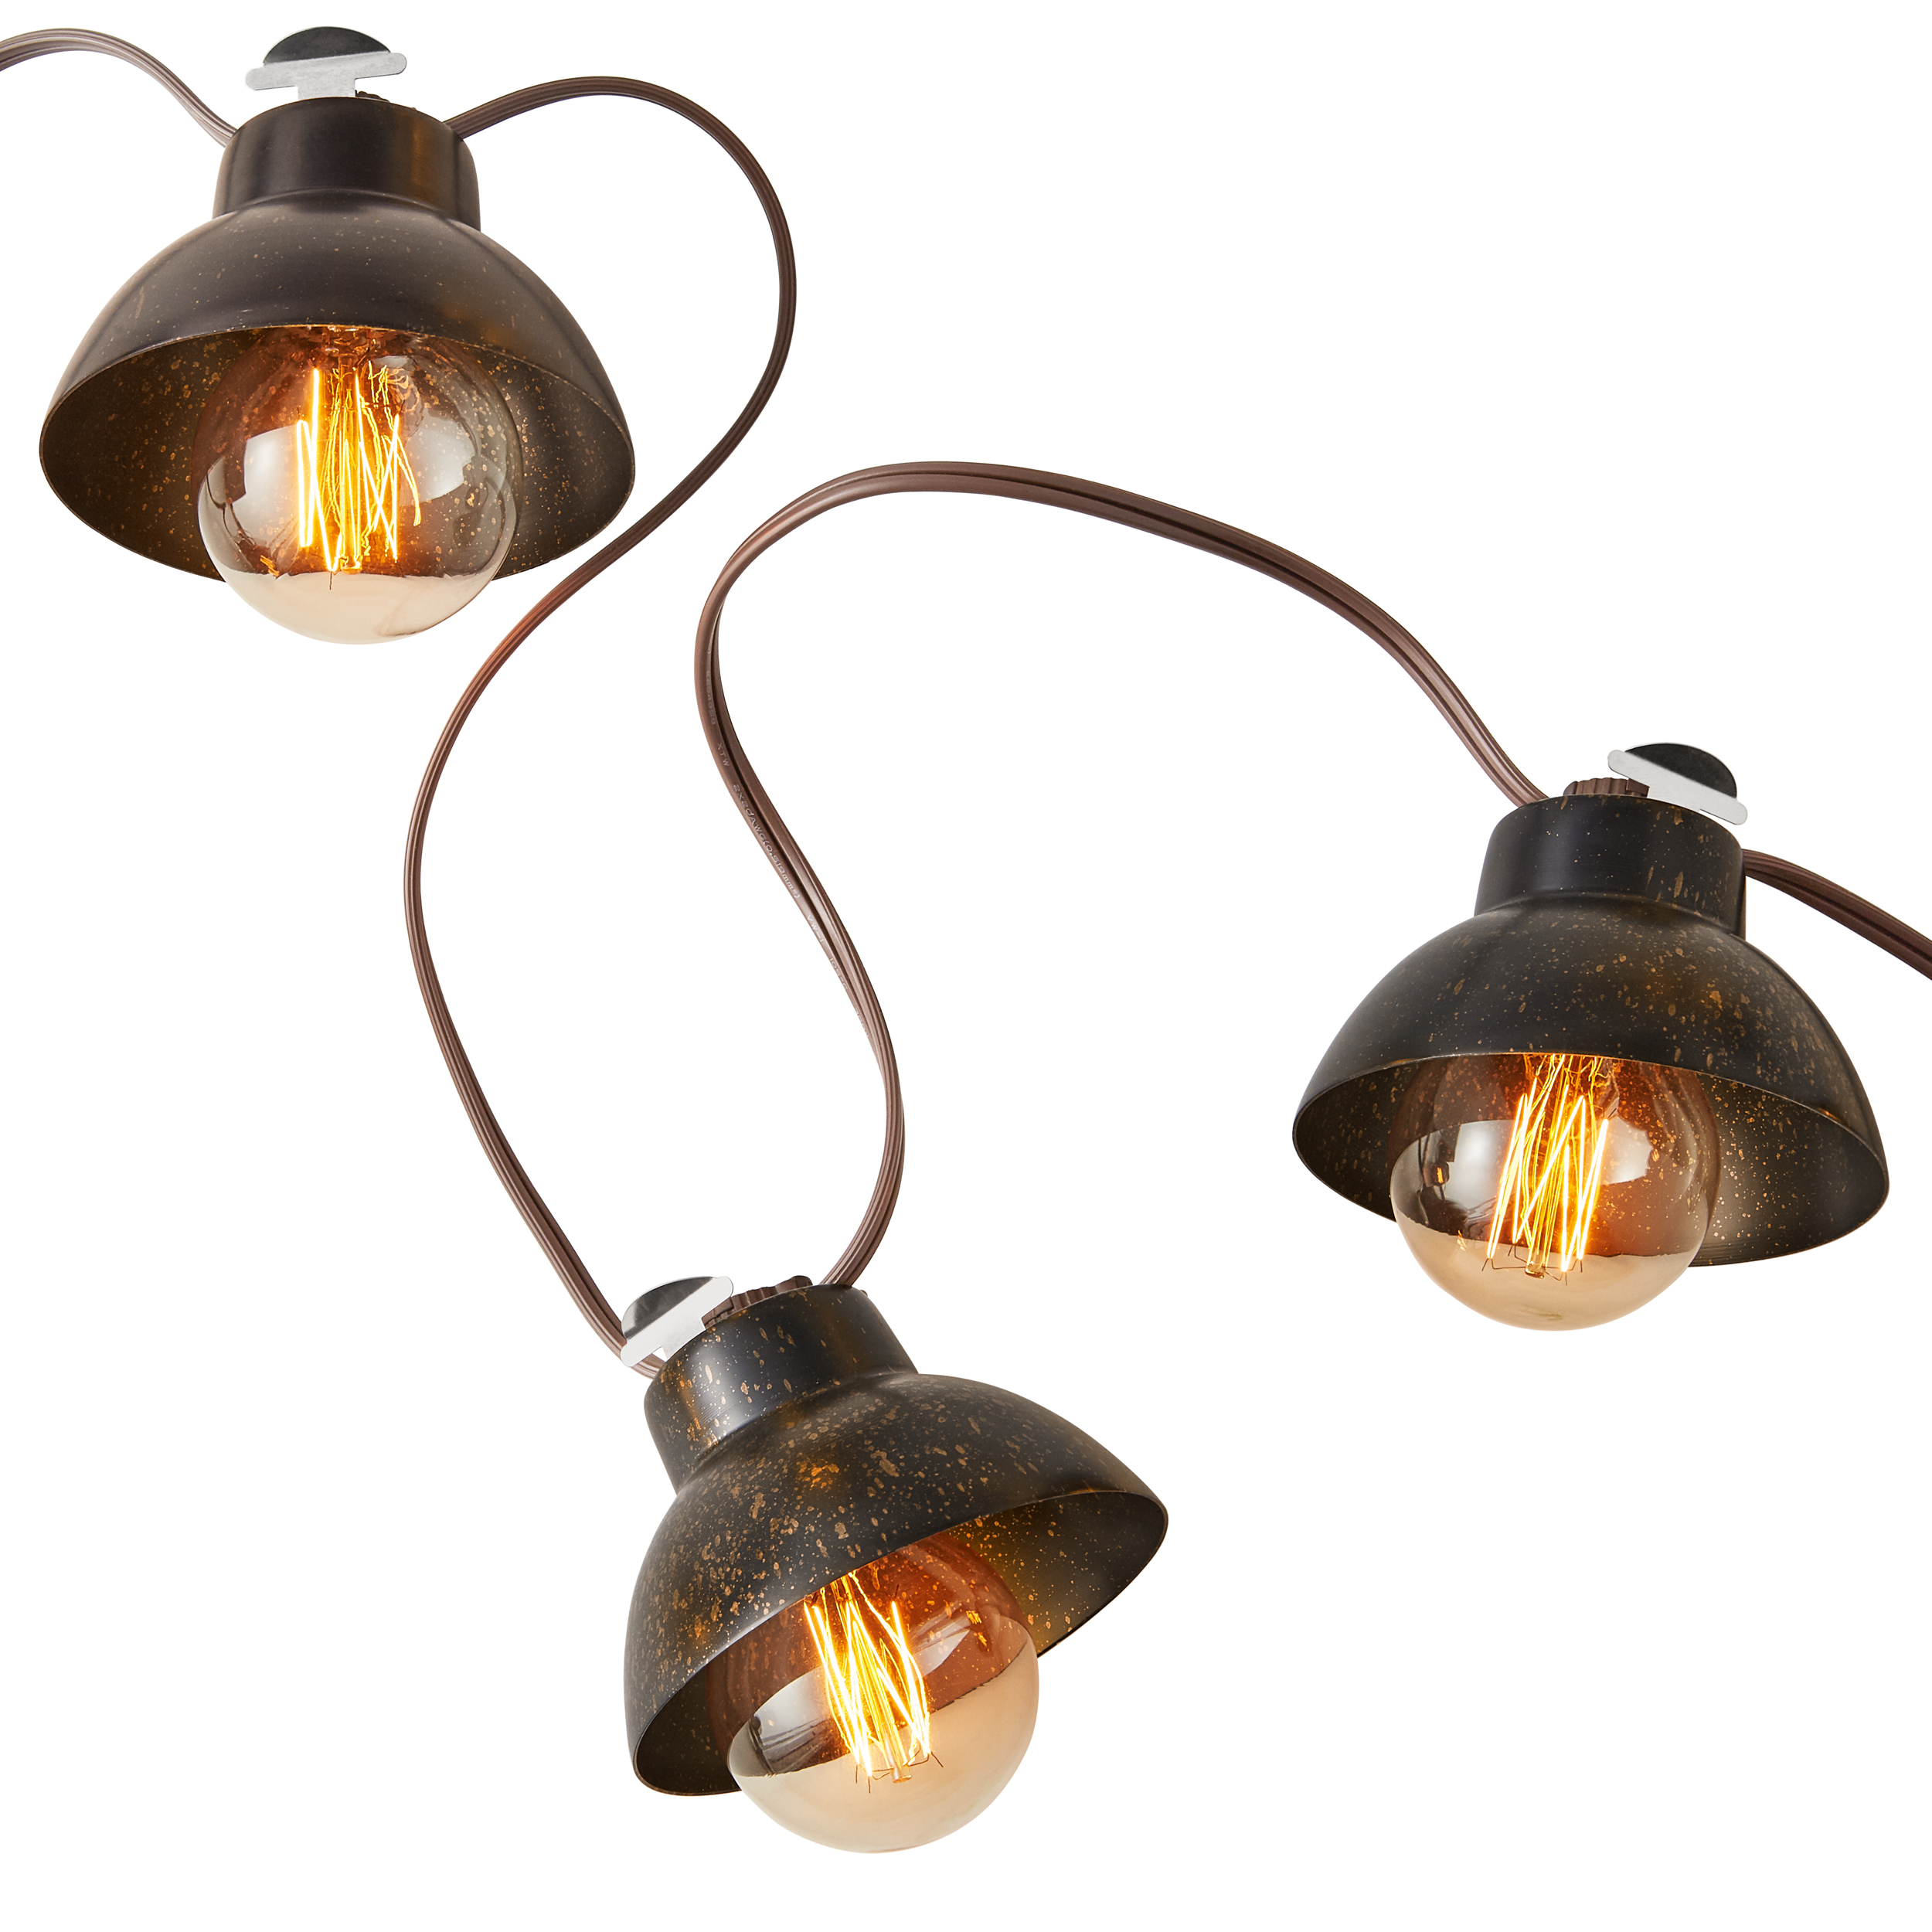 Better Homes & Gardens 10-Count Vintage Filament Globe Metal Lantern Outdoor String Lights, with Black Wire - image 2 of 8